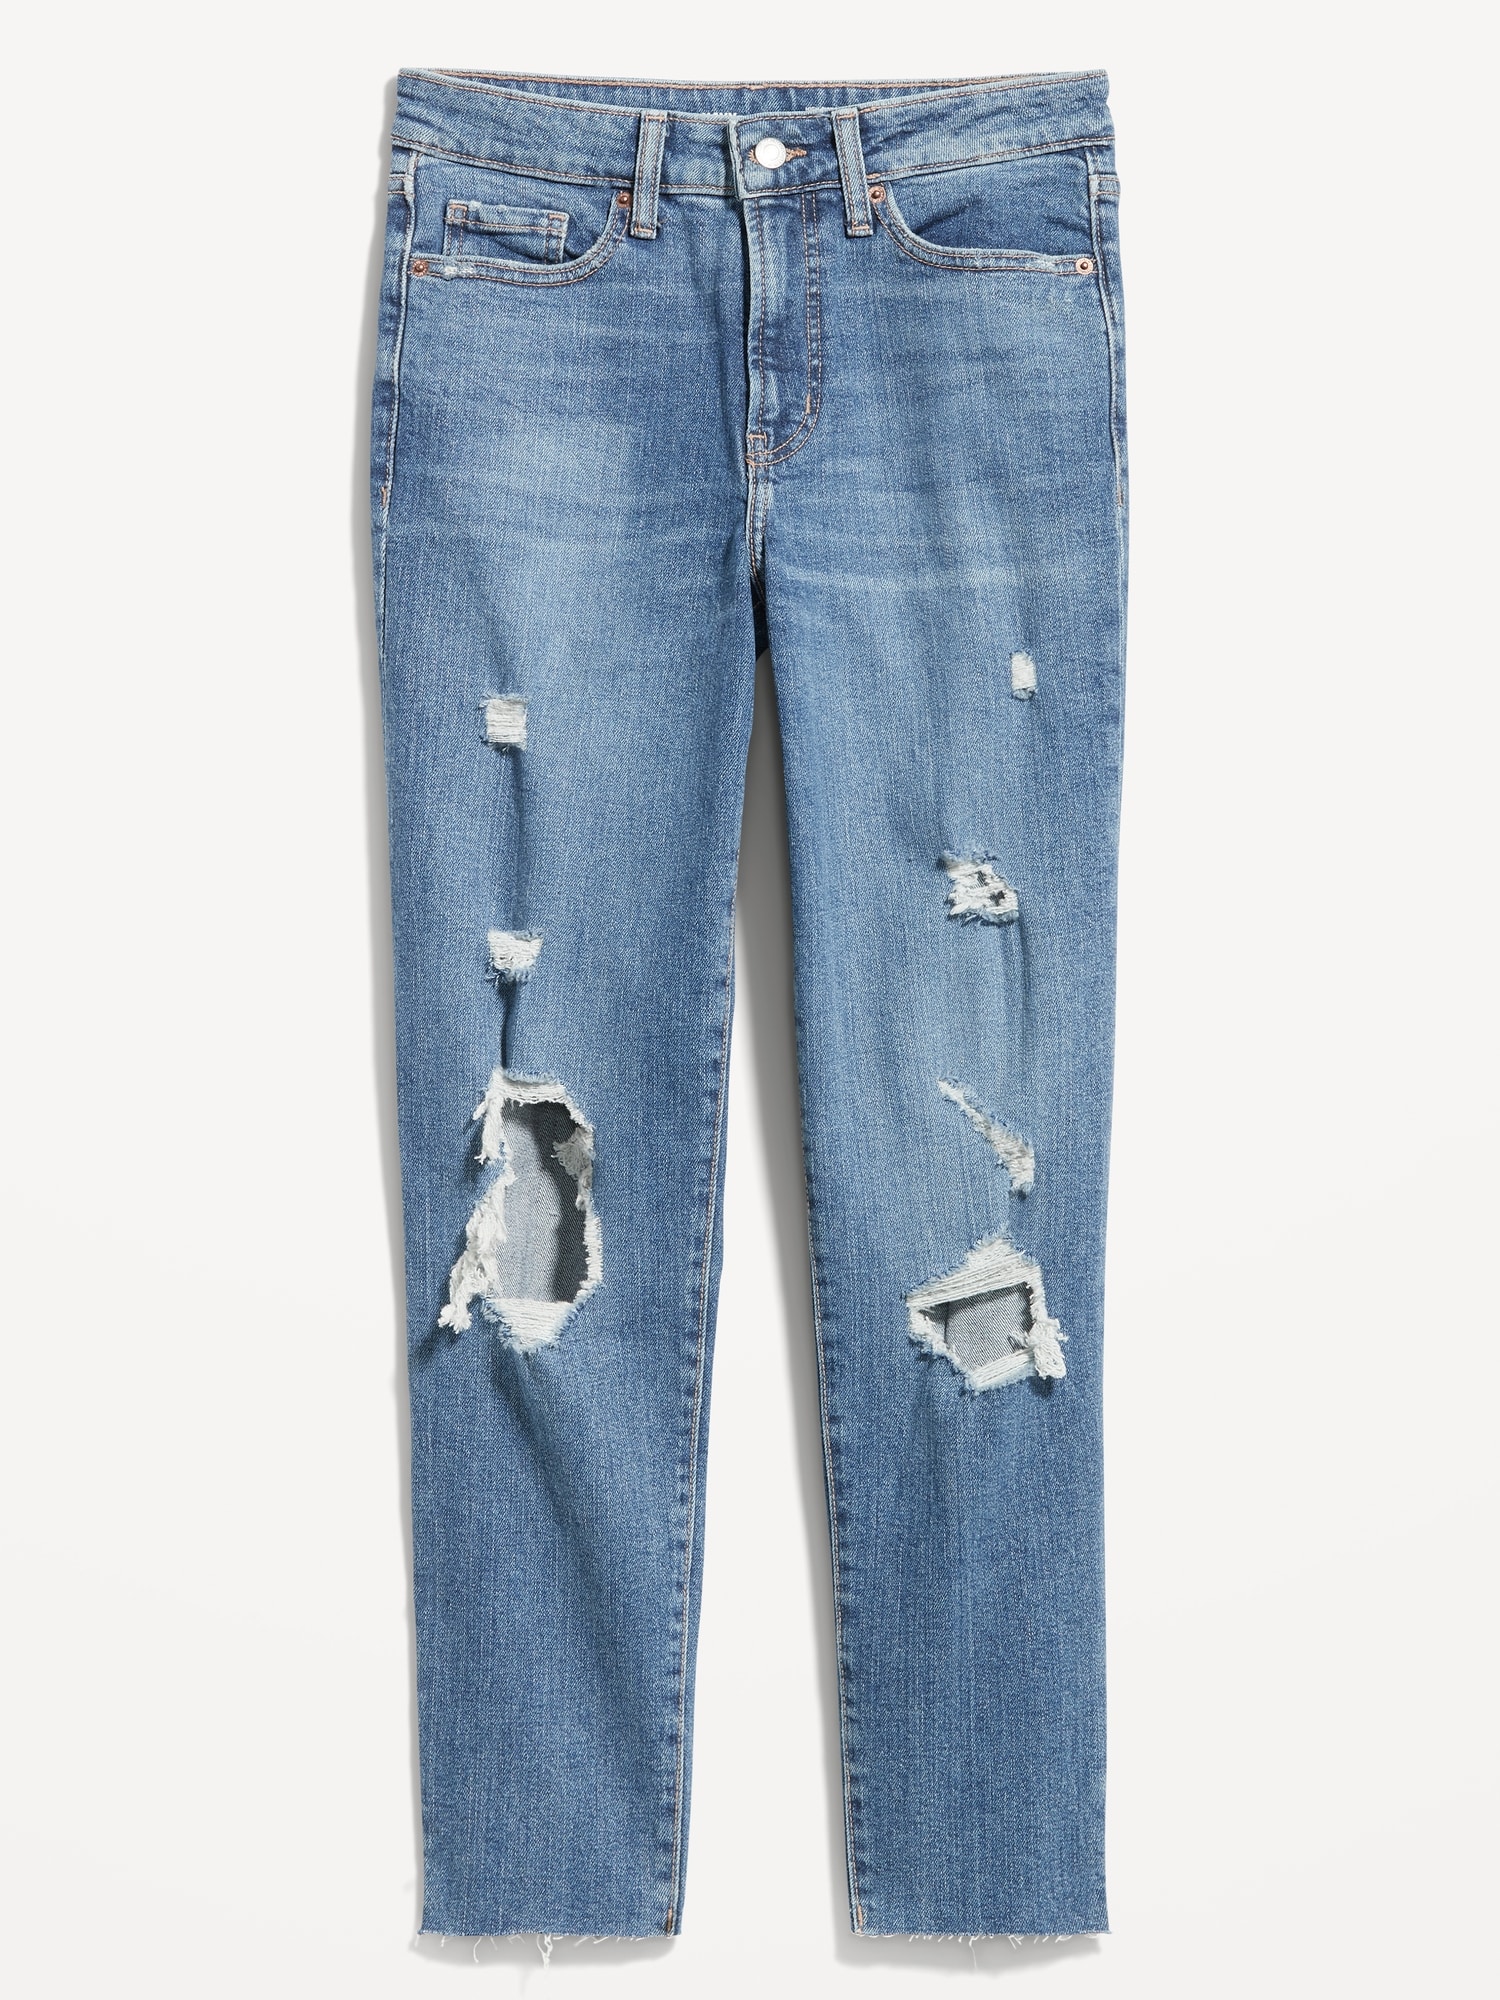 Oldnavy High-Waisted OG Straight Ripped Cut-Off Jeans for Women